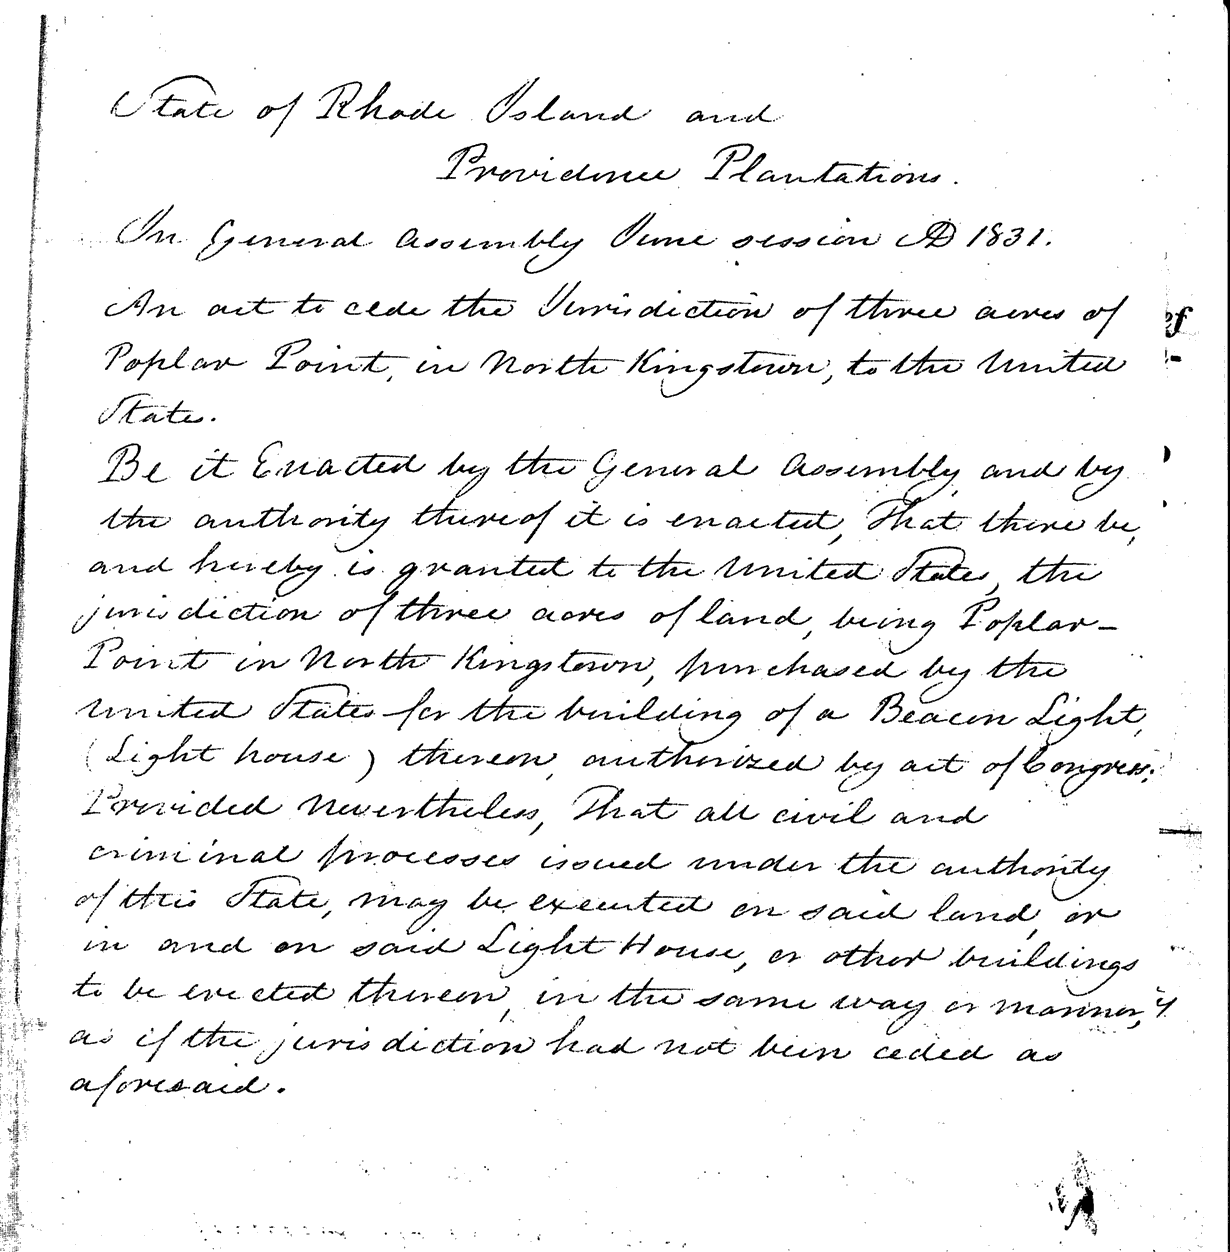 Poplar Point Light - The Act to Ceded the land at Poplar Point to the Federal Government - page 1